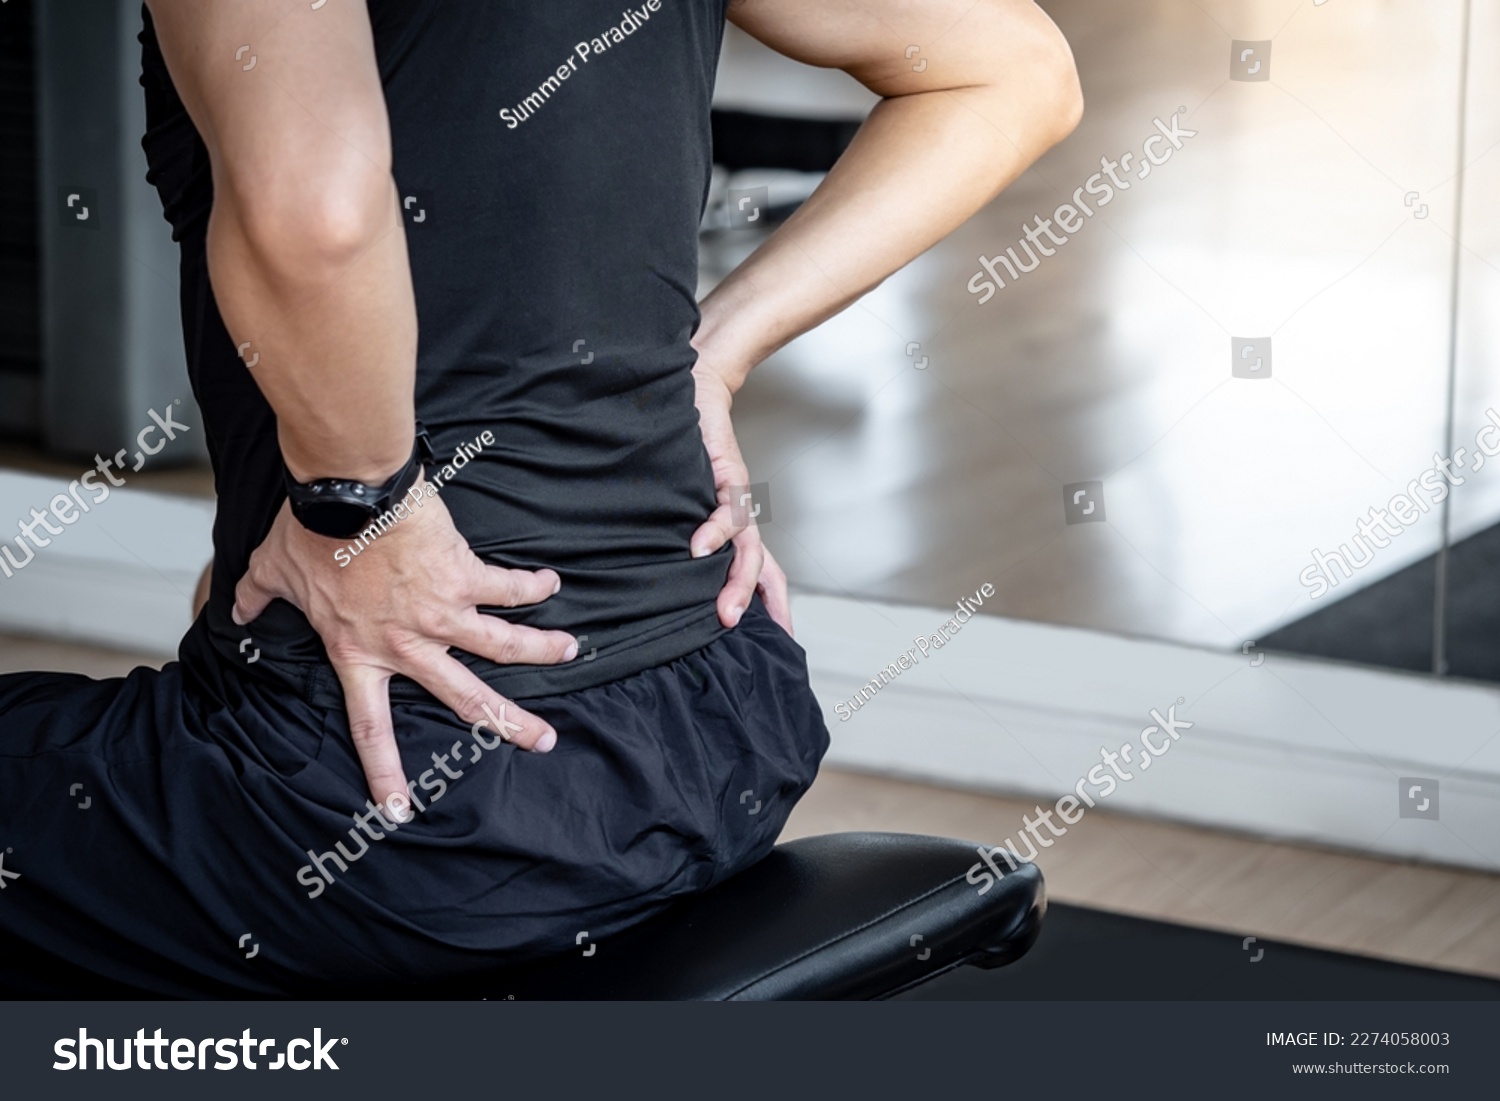 Sport man feeling lower back pain or spine pain while sitting on workout bench in fitness gym. Male athlete suffering from sport injuries symptoms. #2274058003